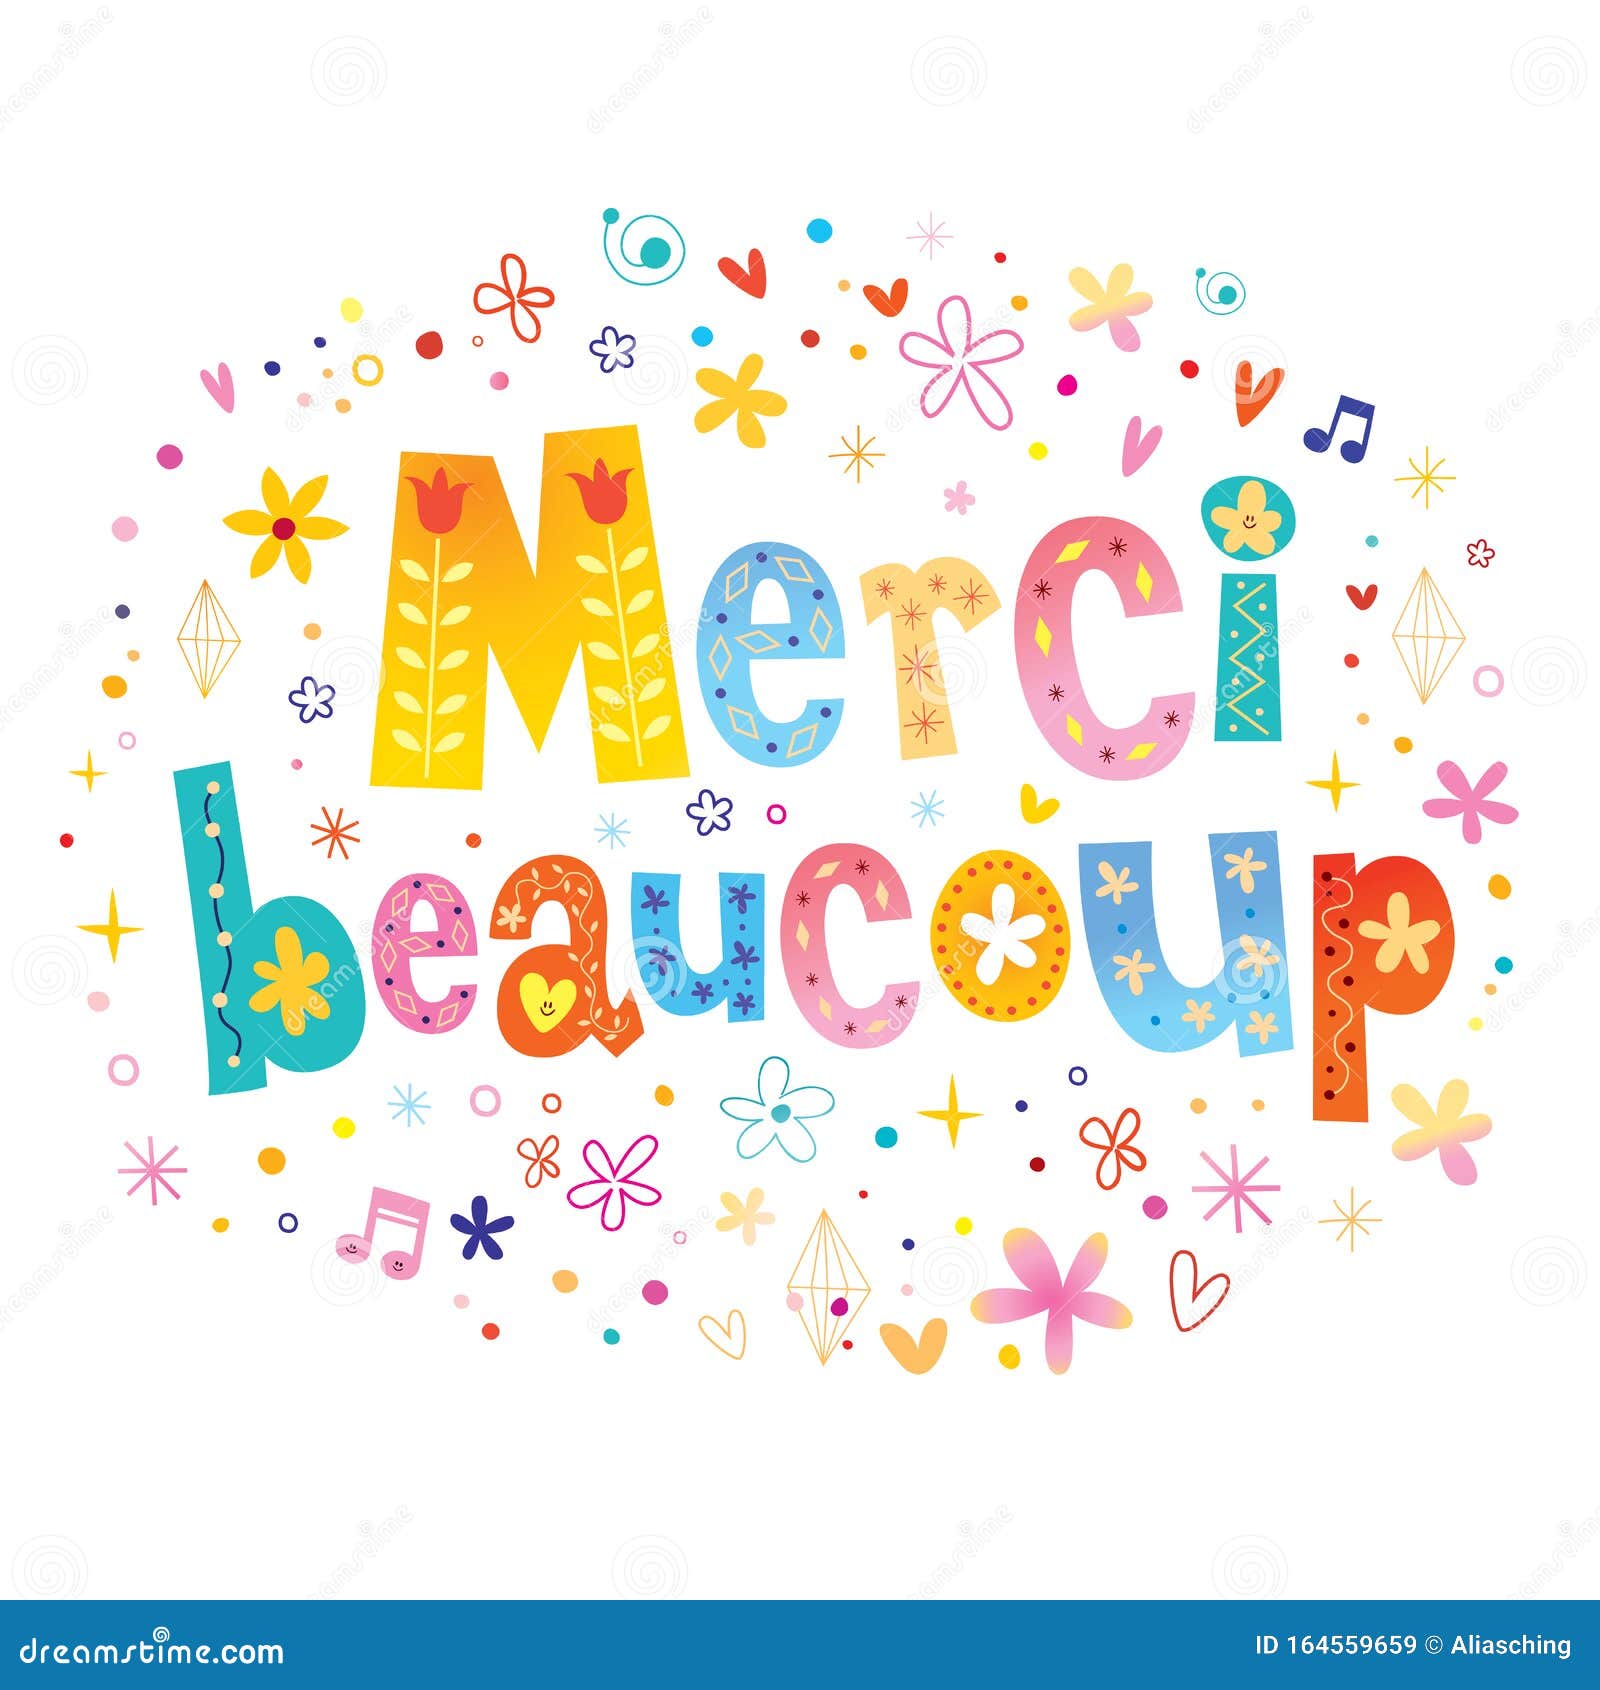 Merci Beaucoup Thank You Very Much in French Stock Vector